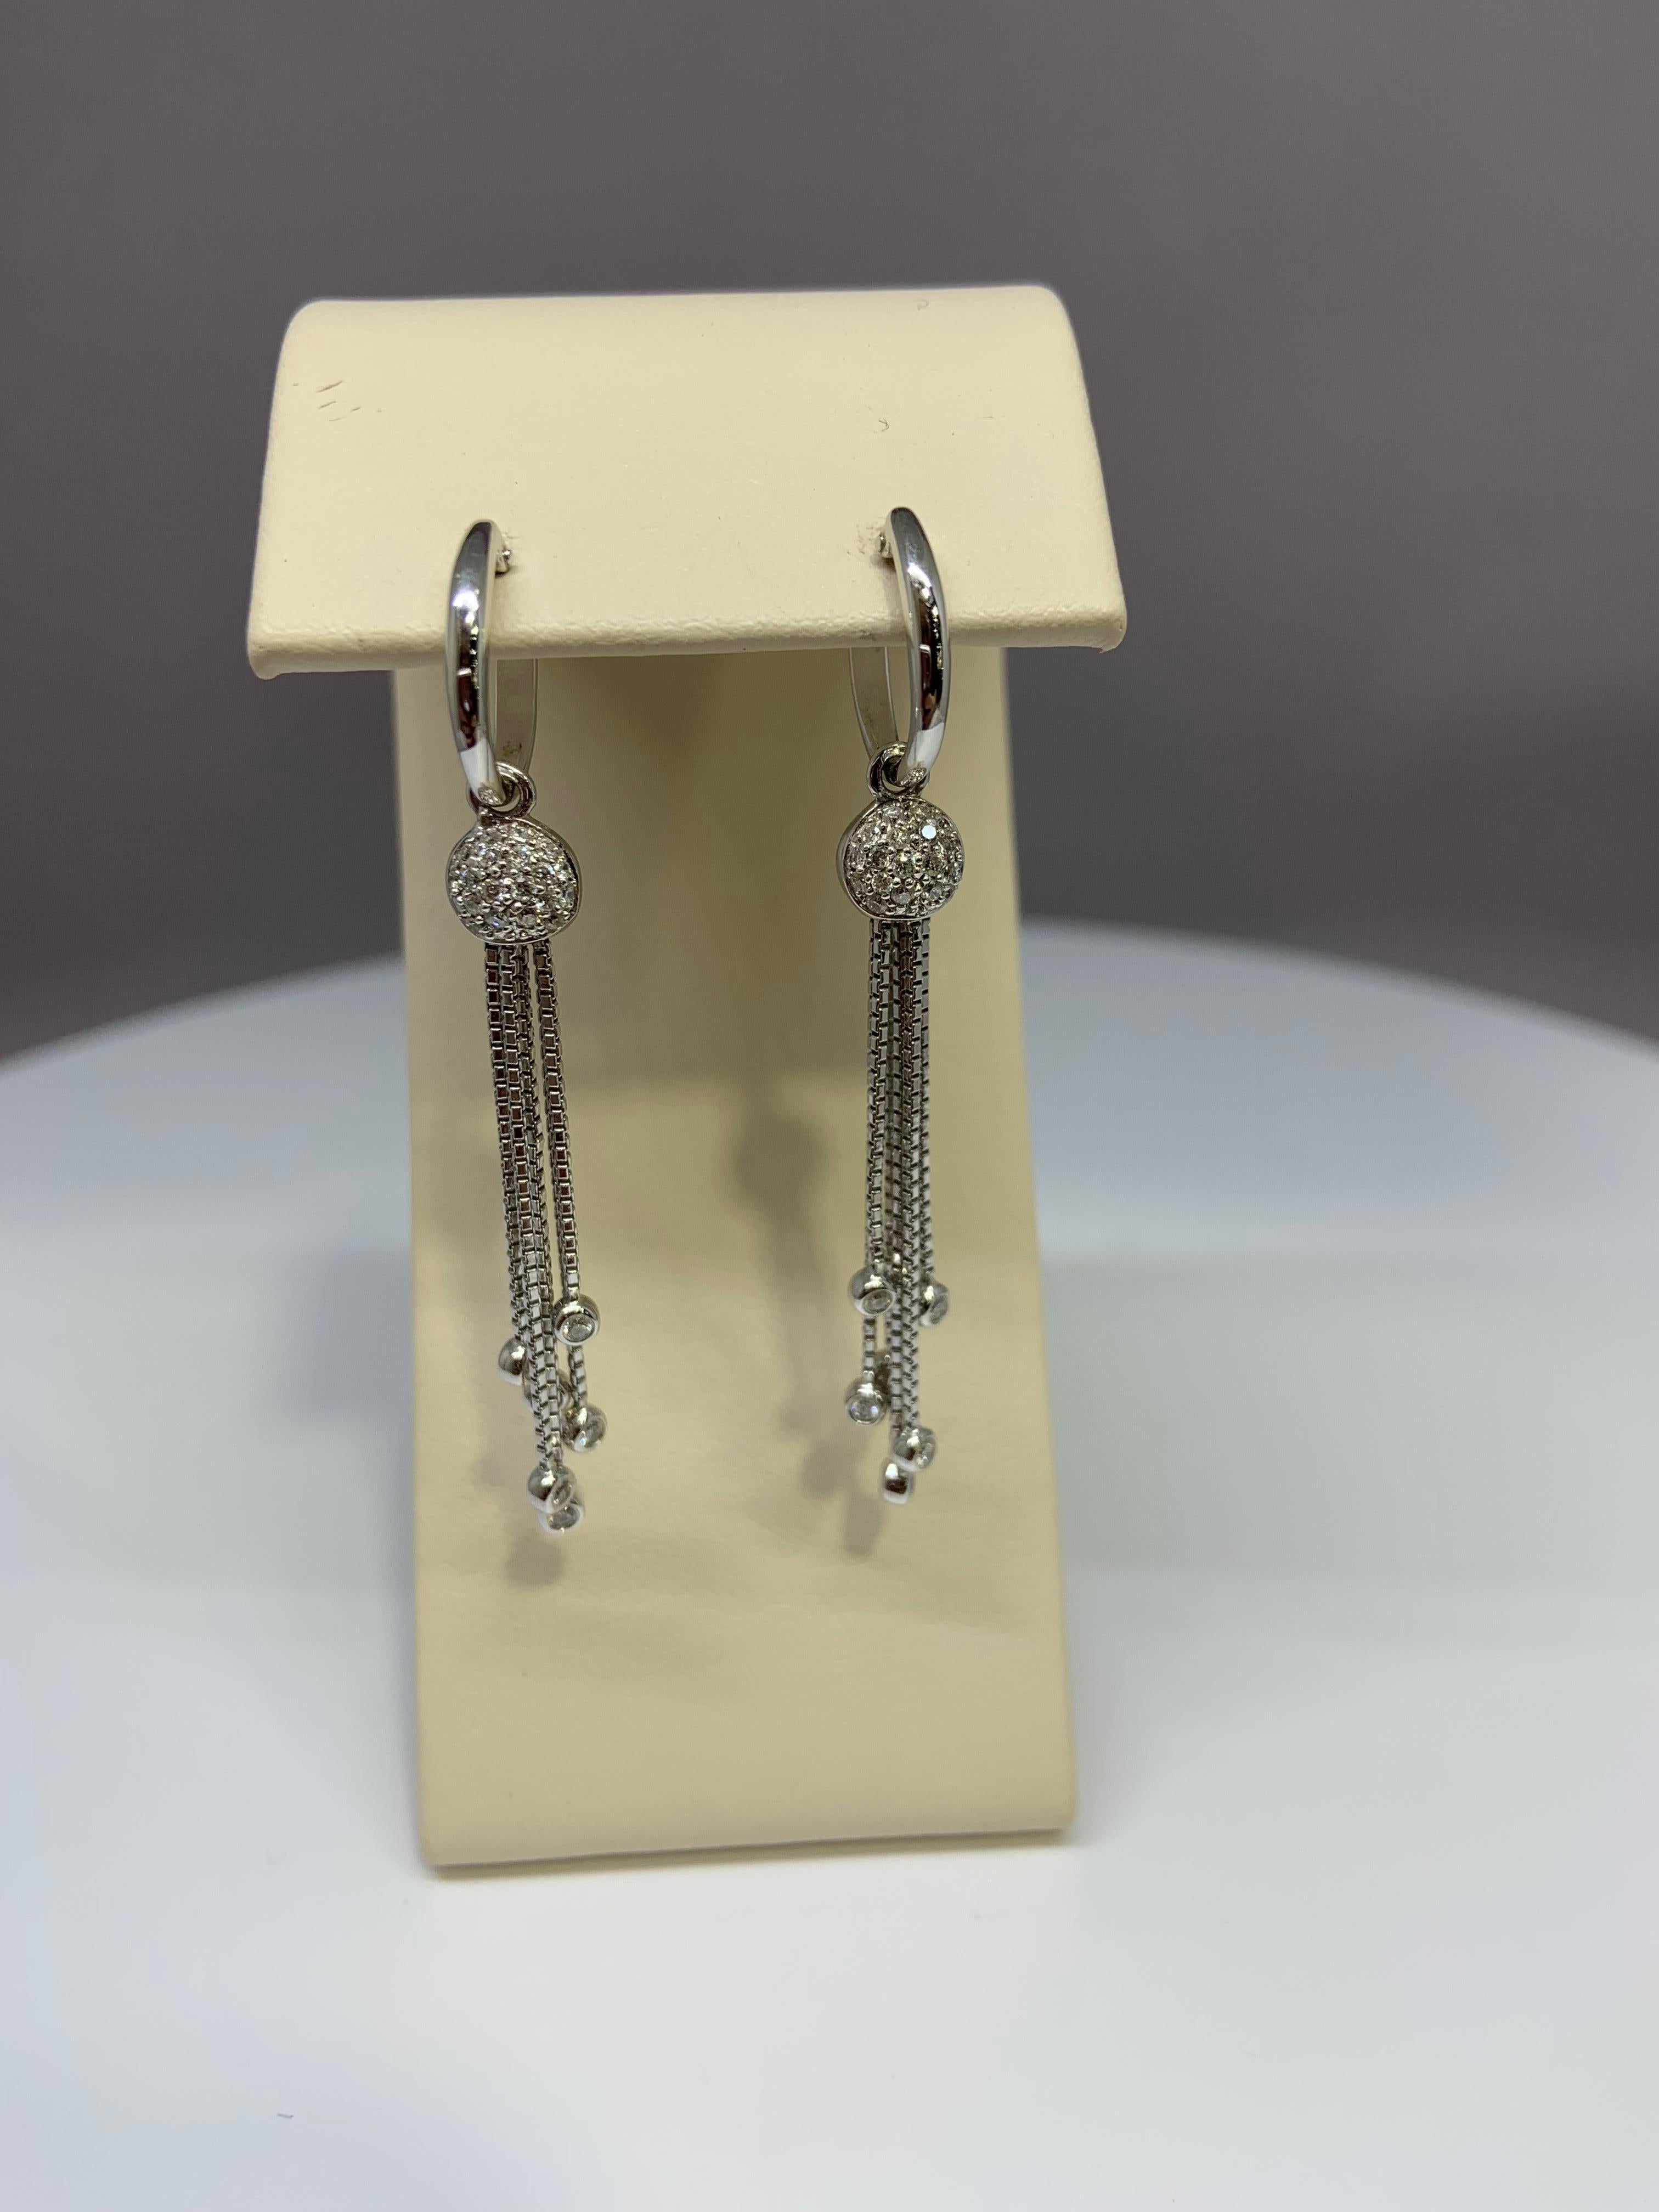 These gorgeous diamond drop earrings are made of 18k white gold. These earrings are estimated to hold just under 1/2 carat total weight of genuine diamonds. 